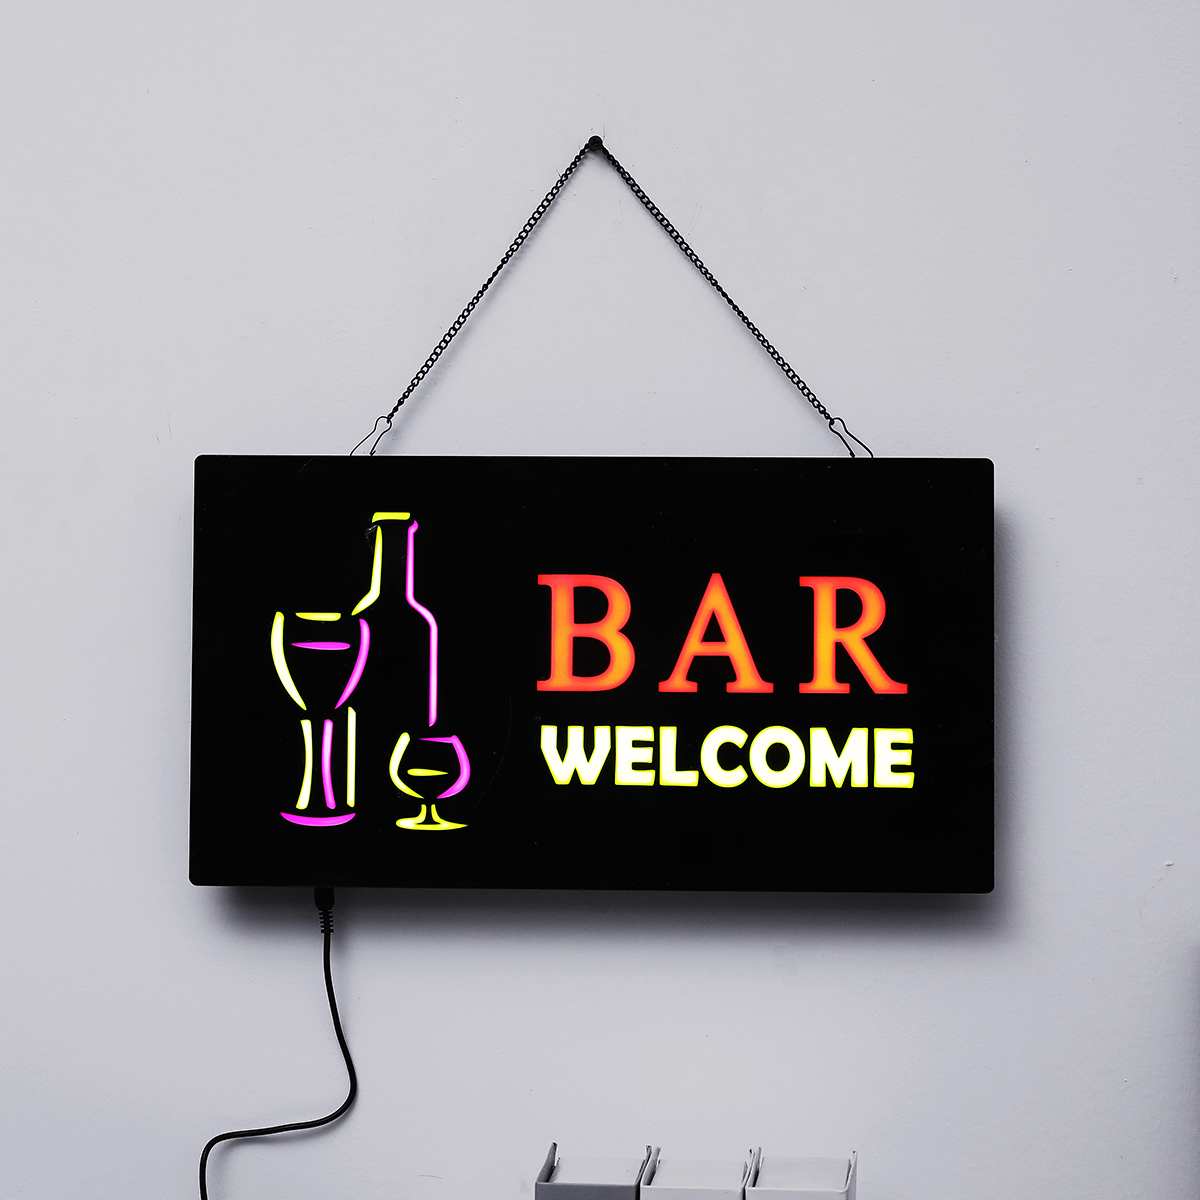 110-240V LED Neon Sign Light Tube Coffee Bar Commercial Lighting Neon Bulbs Cafeteria Visual Artwork Lamp Wall Decoration